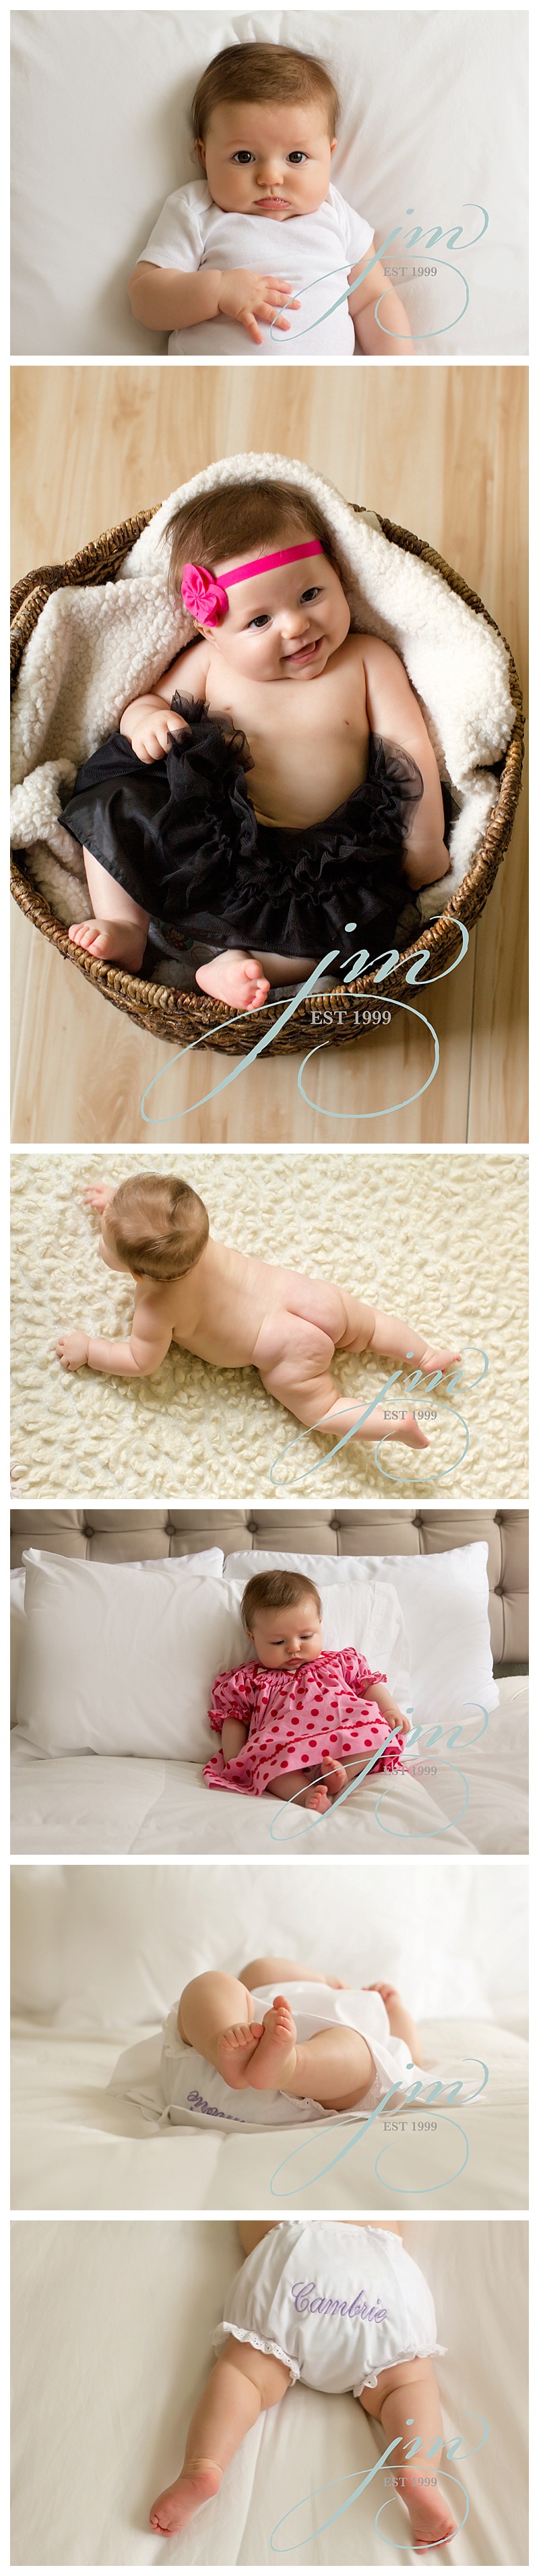 baby-picture-ideas